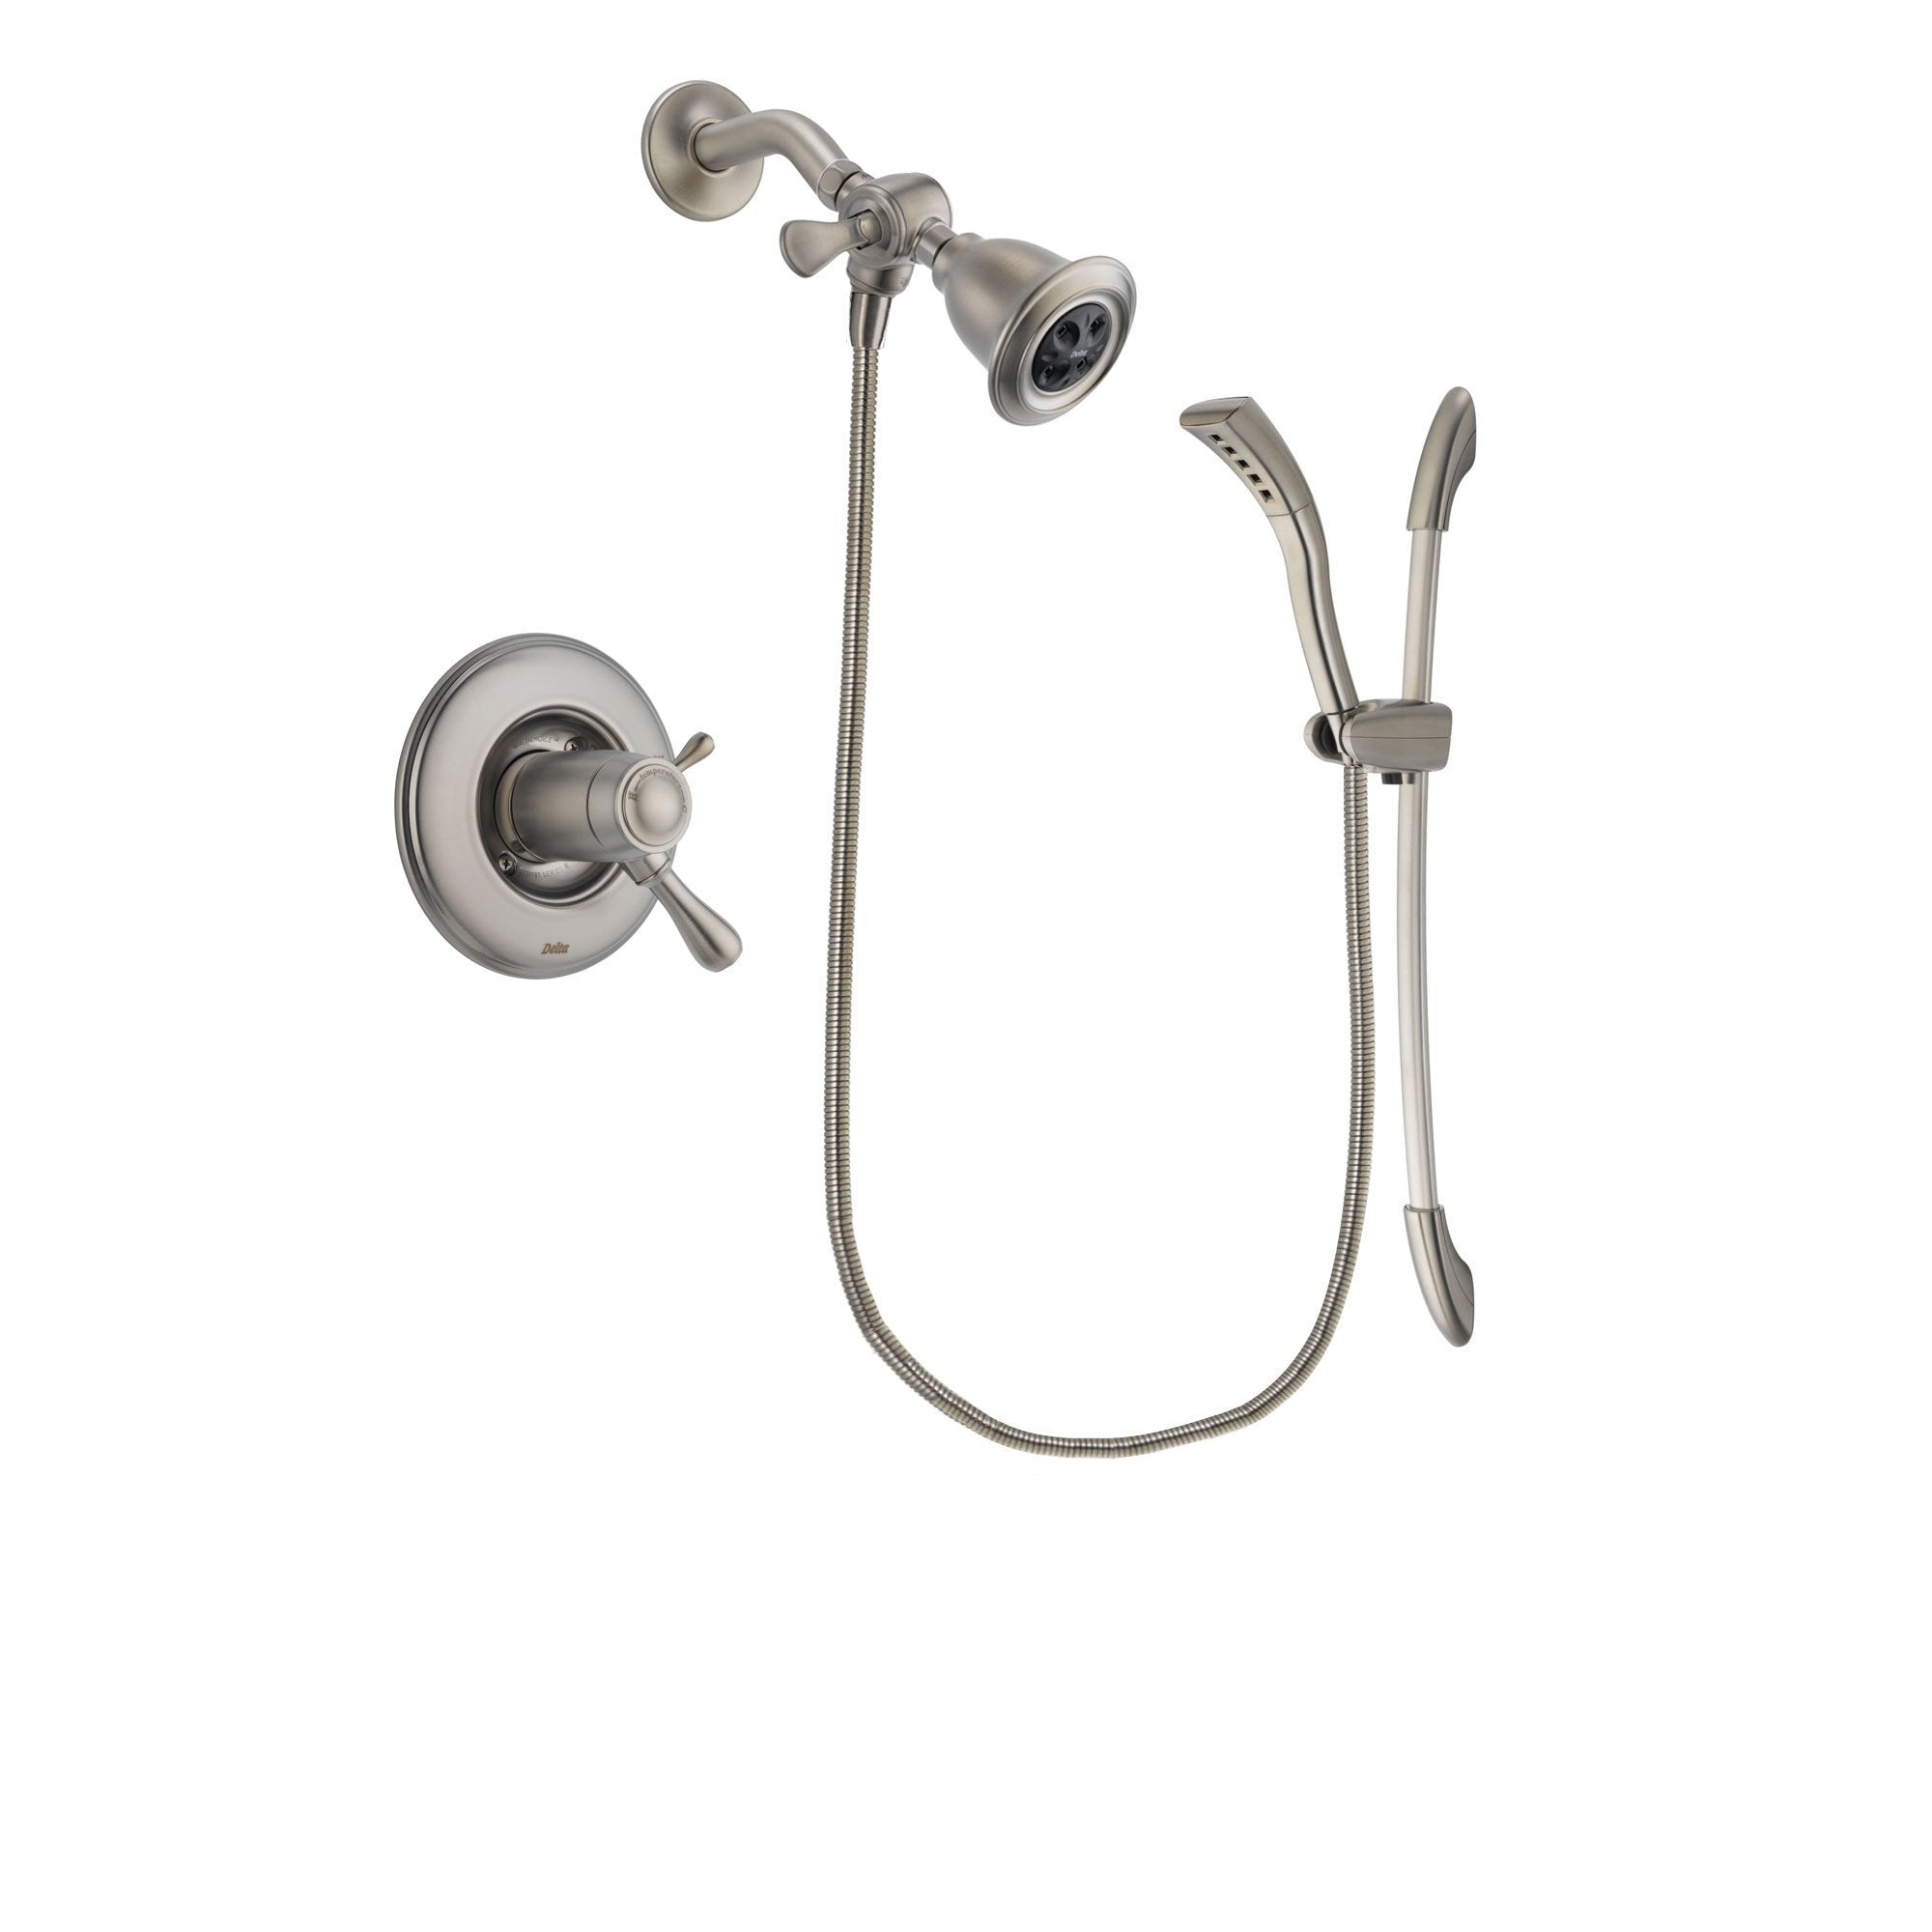 Delta Leland Stainless Steel Finish Thermostatic Shower Faucet System Package with Water Efficient Showerhead and Handshower with Slide Bar Includes Rough-in Valve DSP1416V